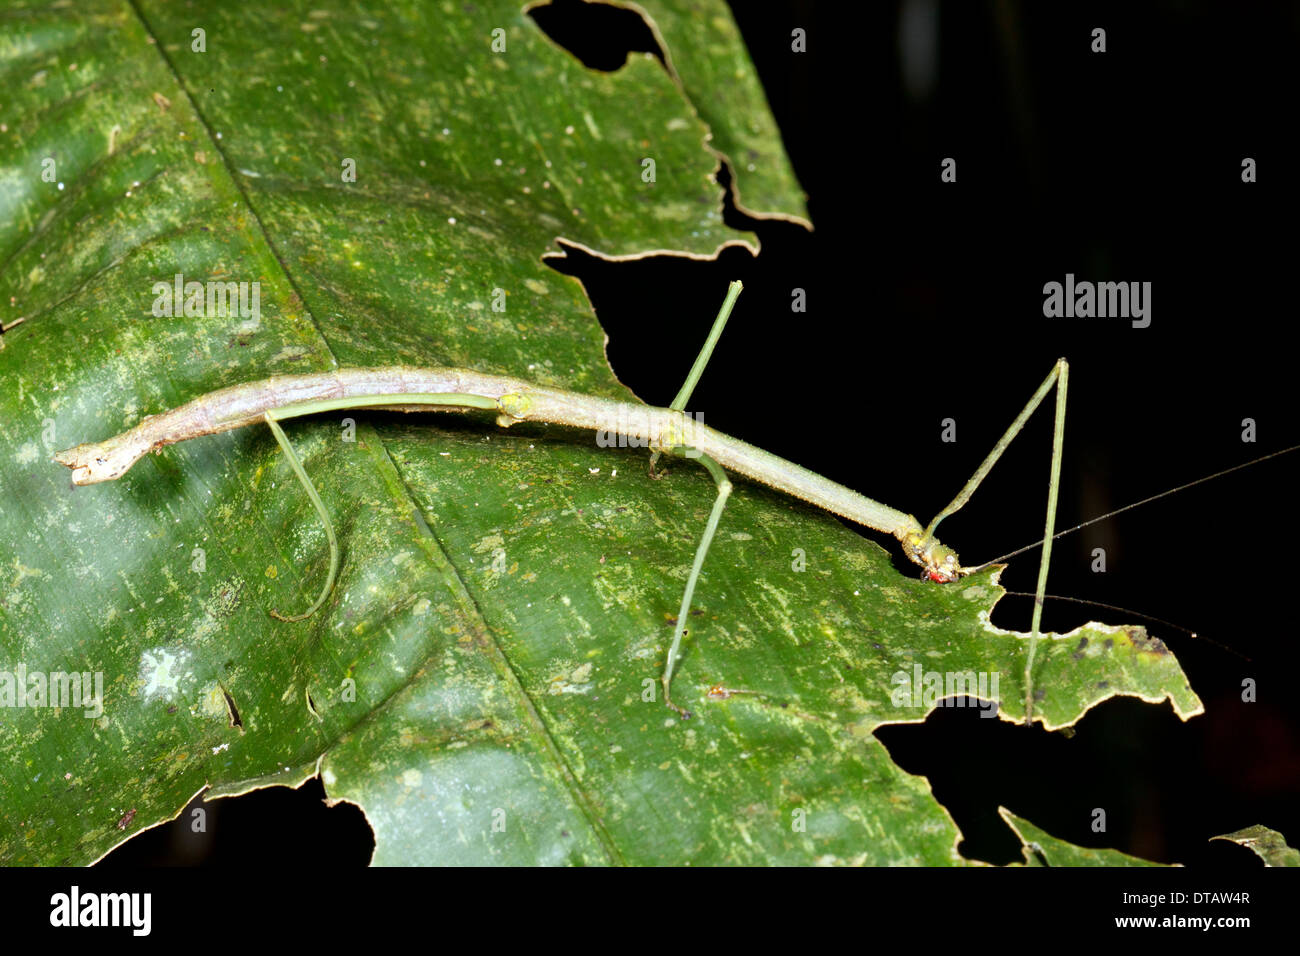 Green stick insect eating a leaf in the rainforest understory, Ecuador Stock Photo